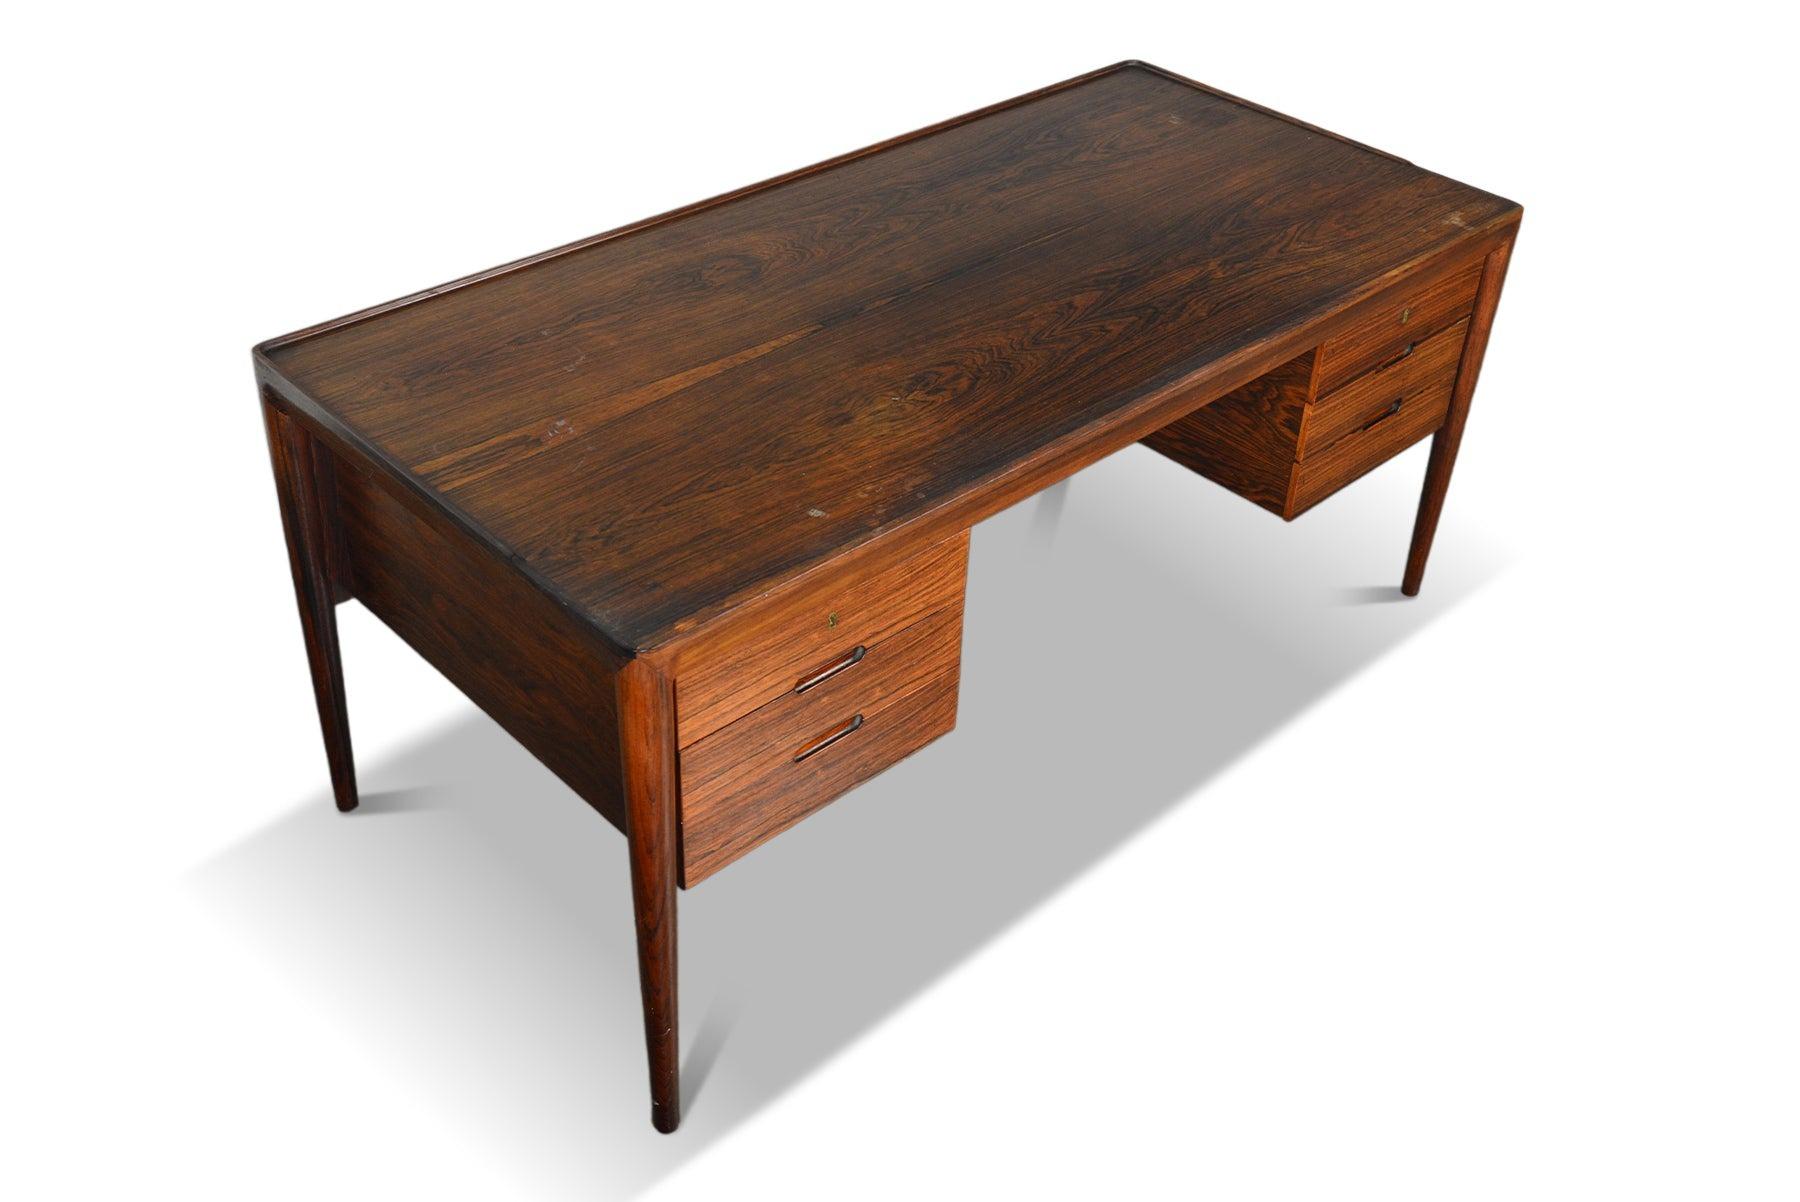 20th Century Executive rosewood writing desk by erik riisager hansen For Sale